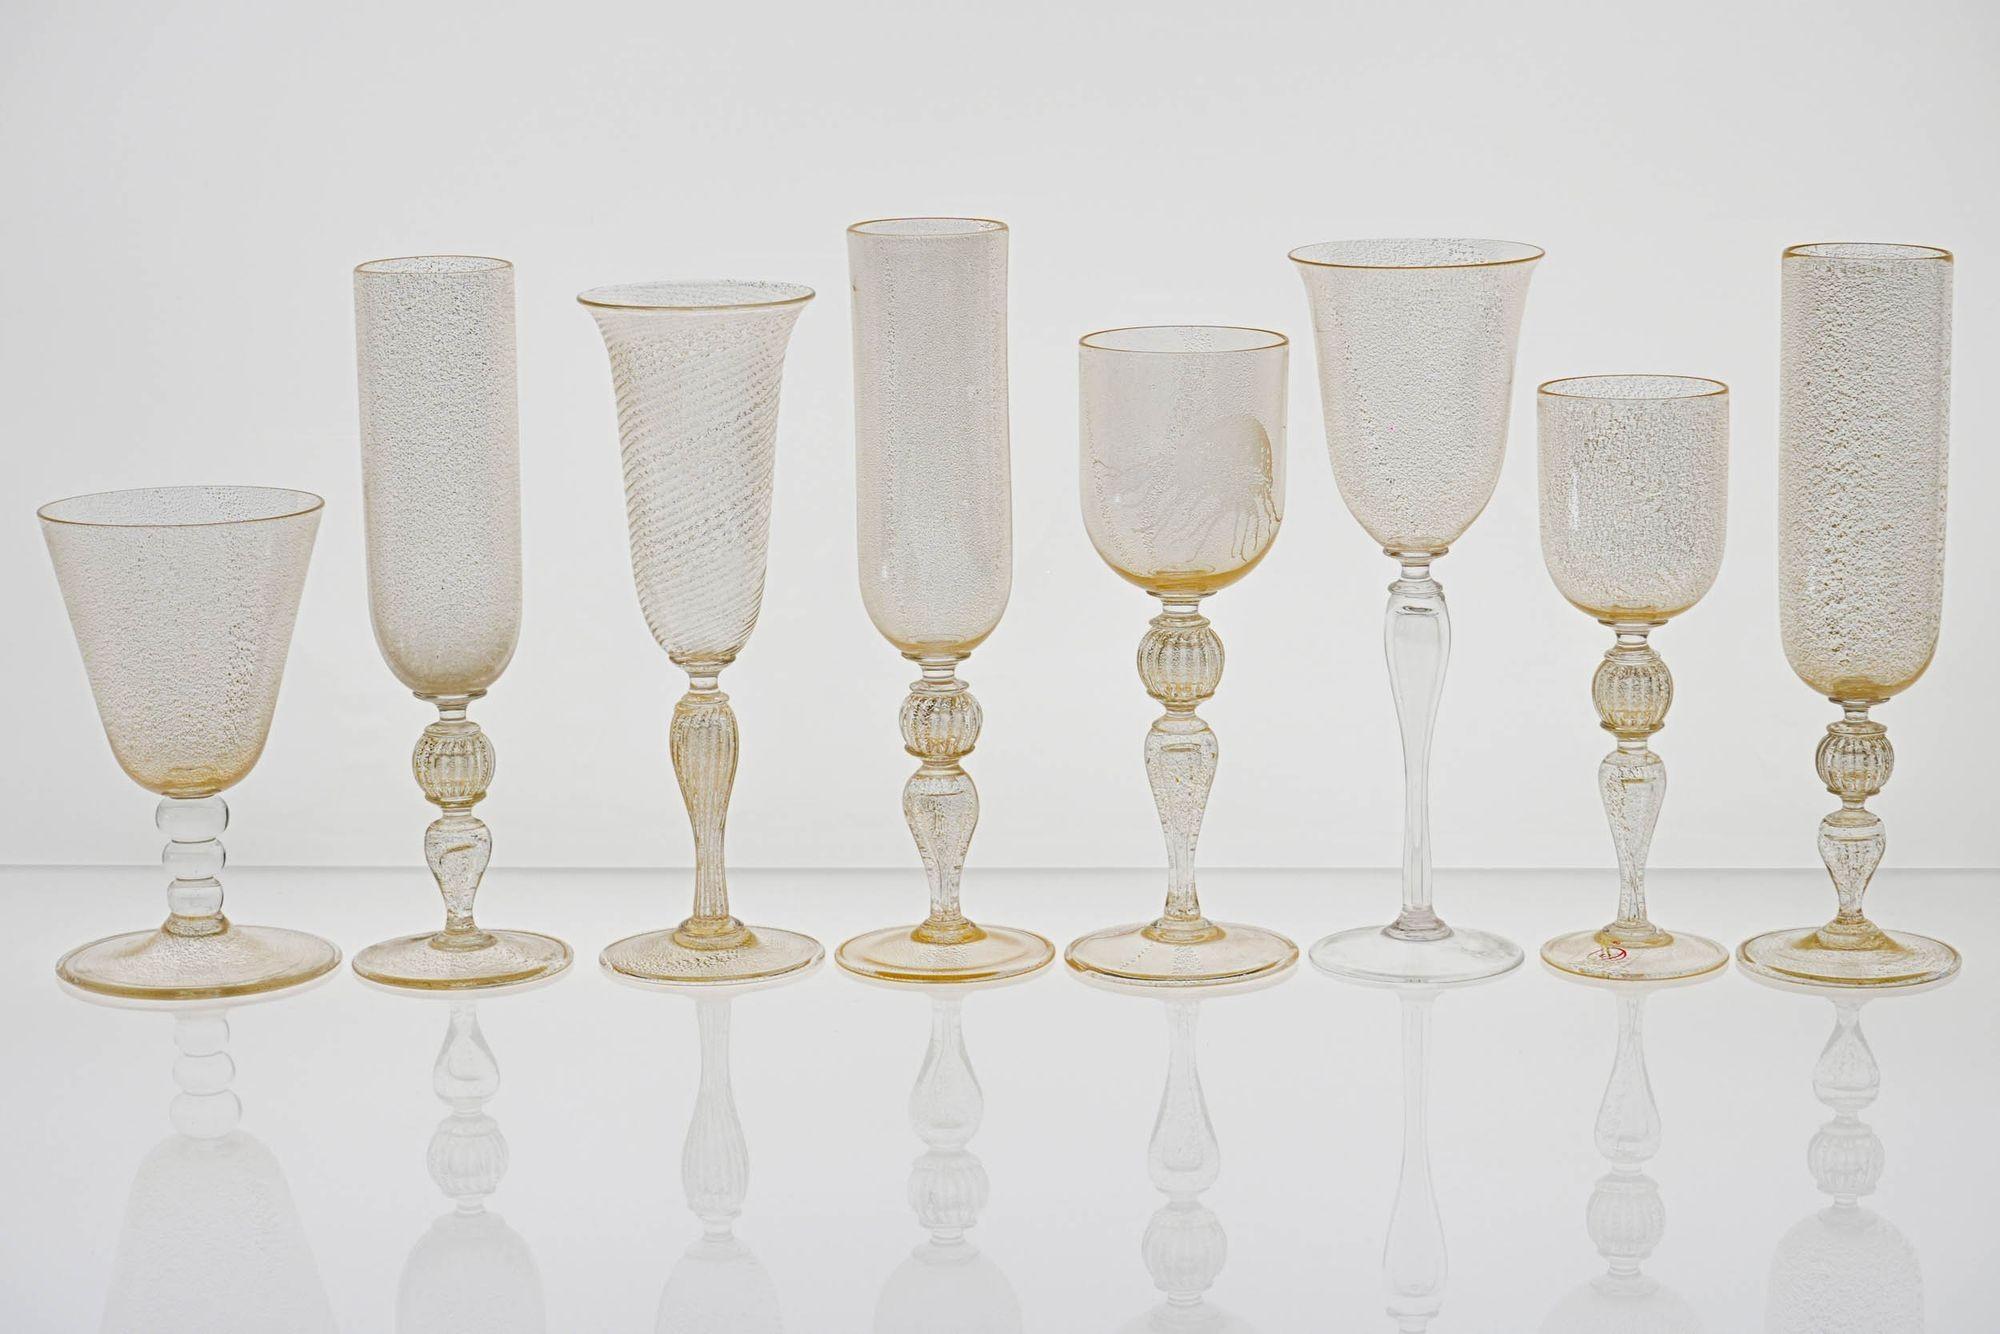 I had the privilege of gaining access to the collection of individual Cenedese glass pieces, which I am curating into eclectic sets of unique pieces.

What ties together this group of 8 stemmed glasses is to carry a 24K gold leaf embedded in the